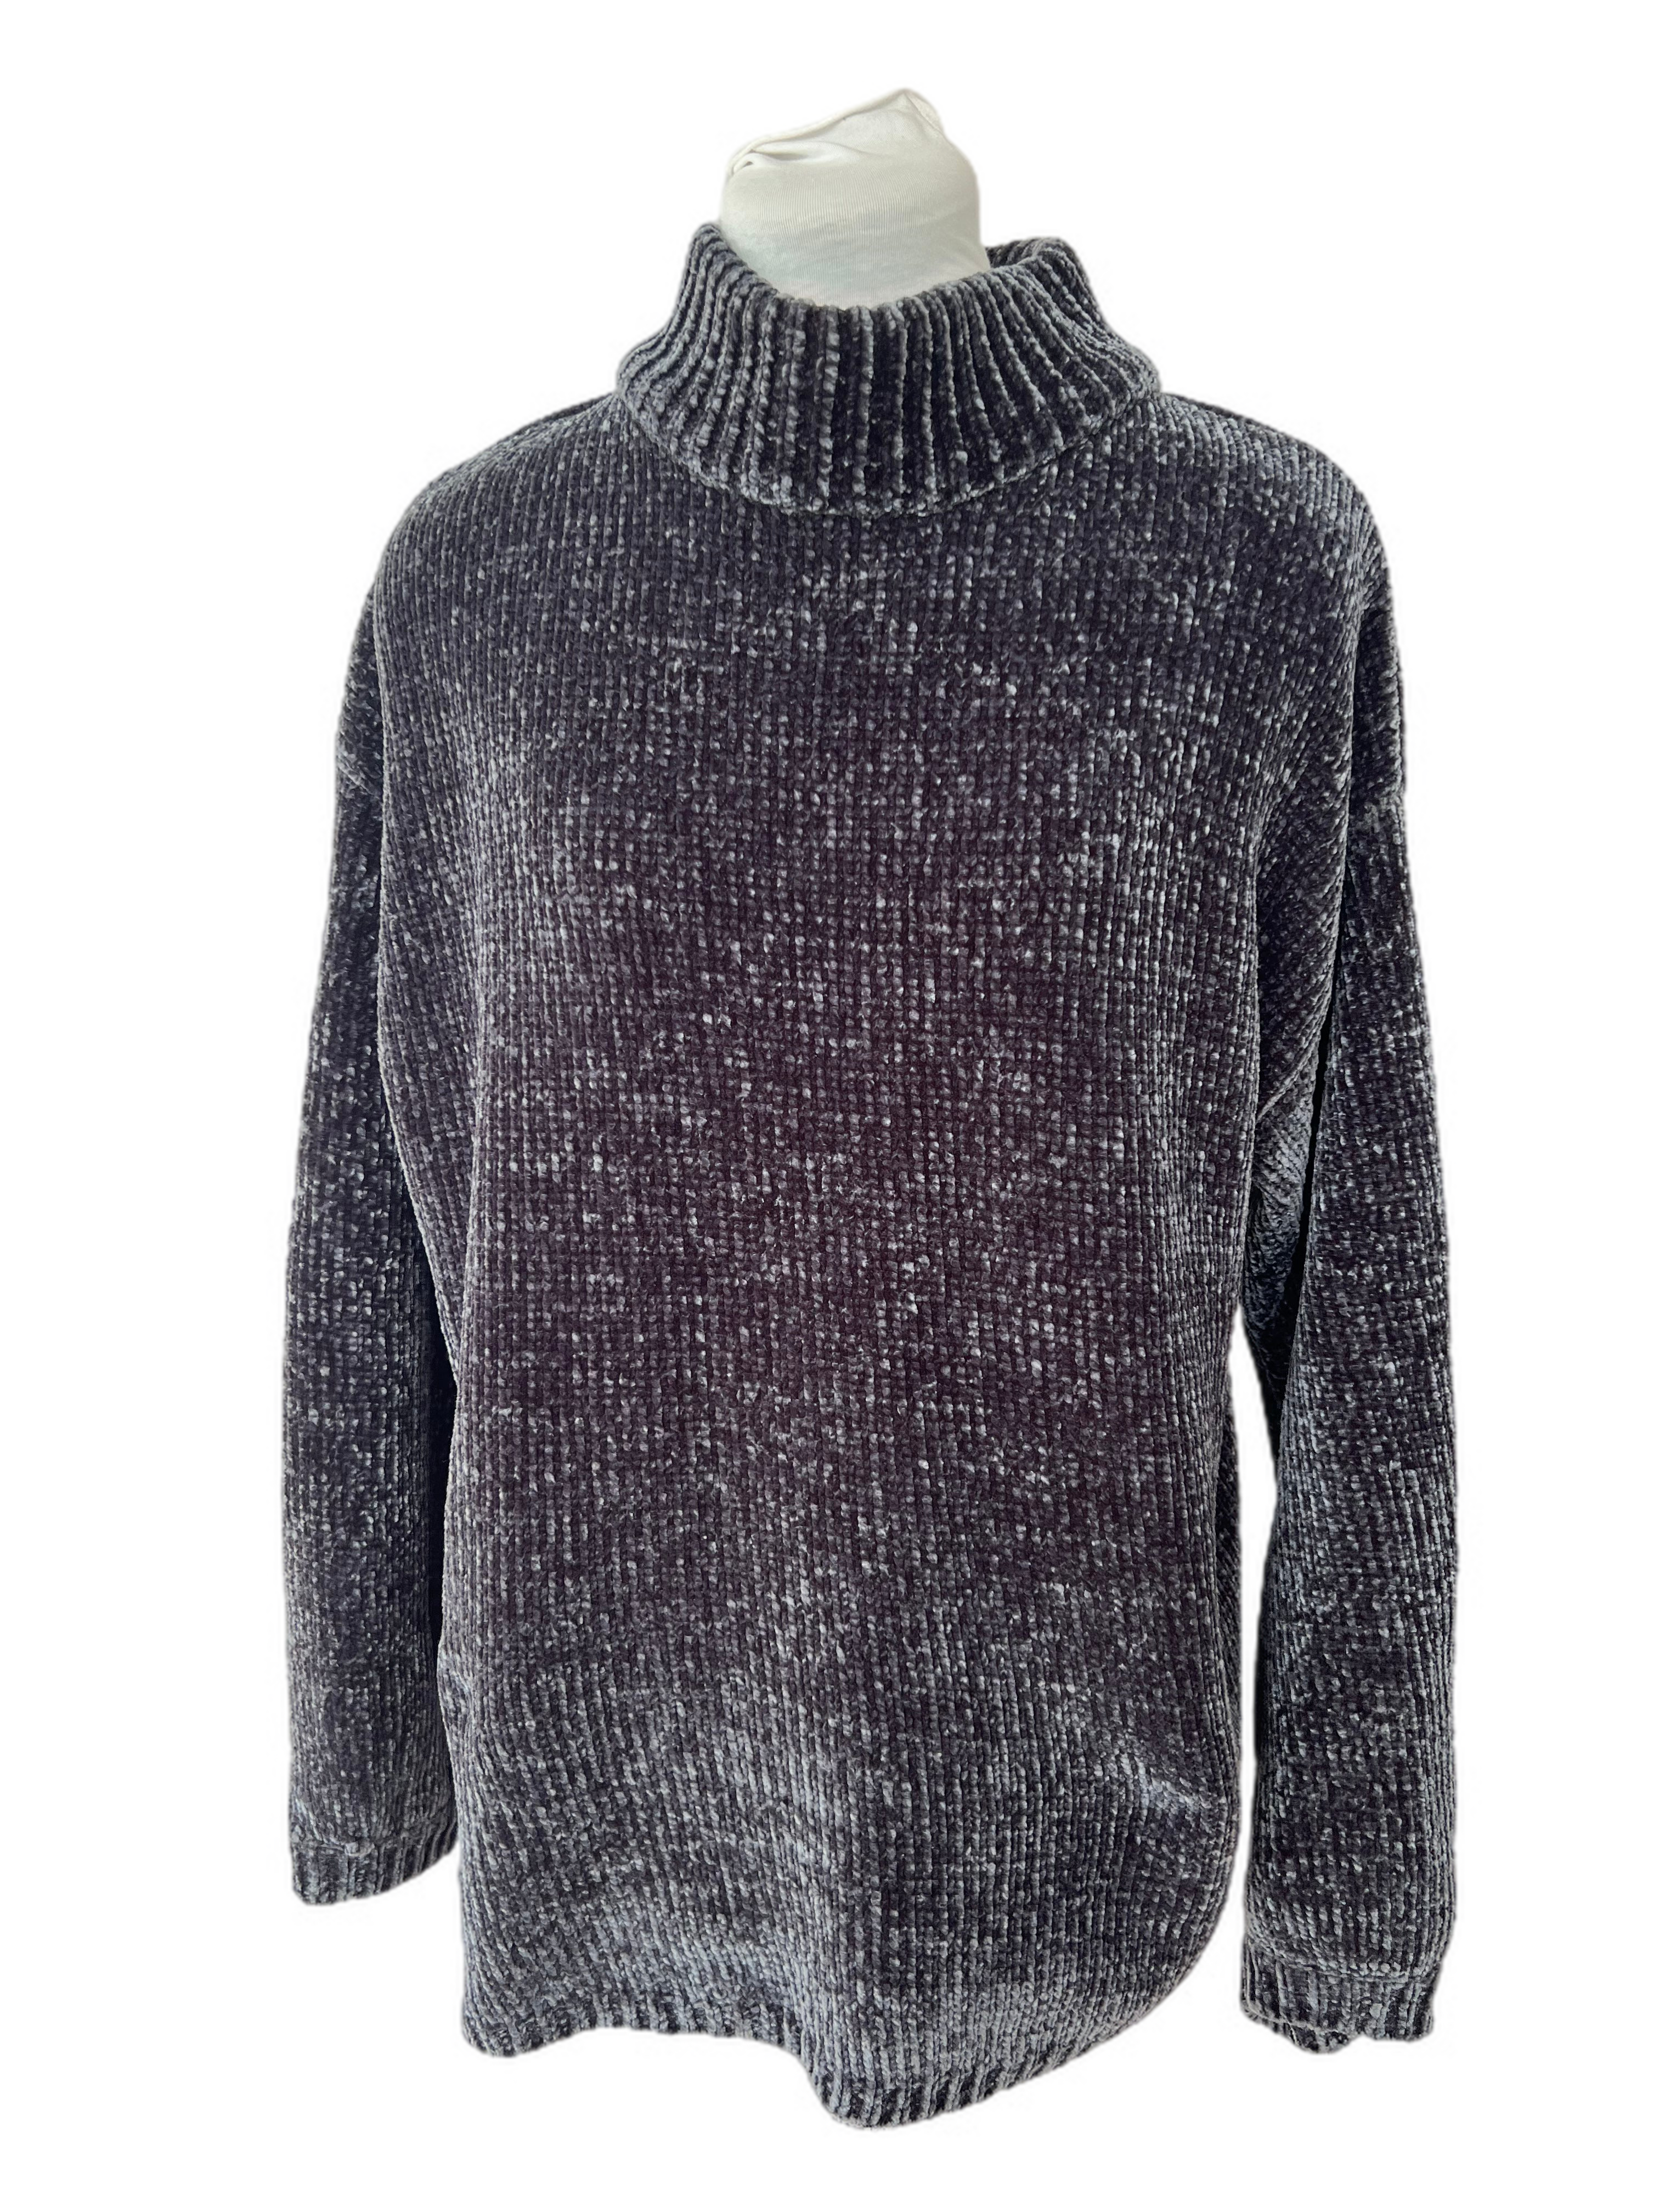 Polo neck knit jumper with button detail at sleeves some piling